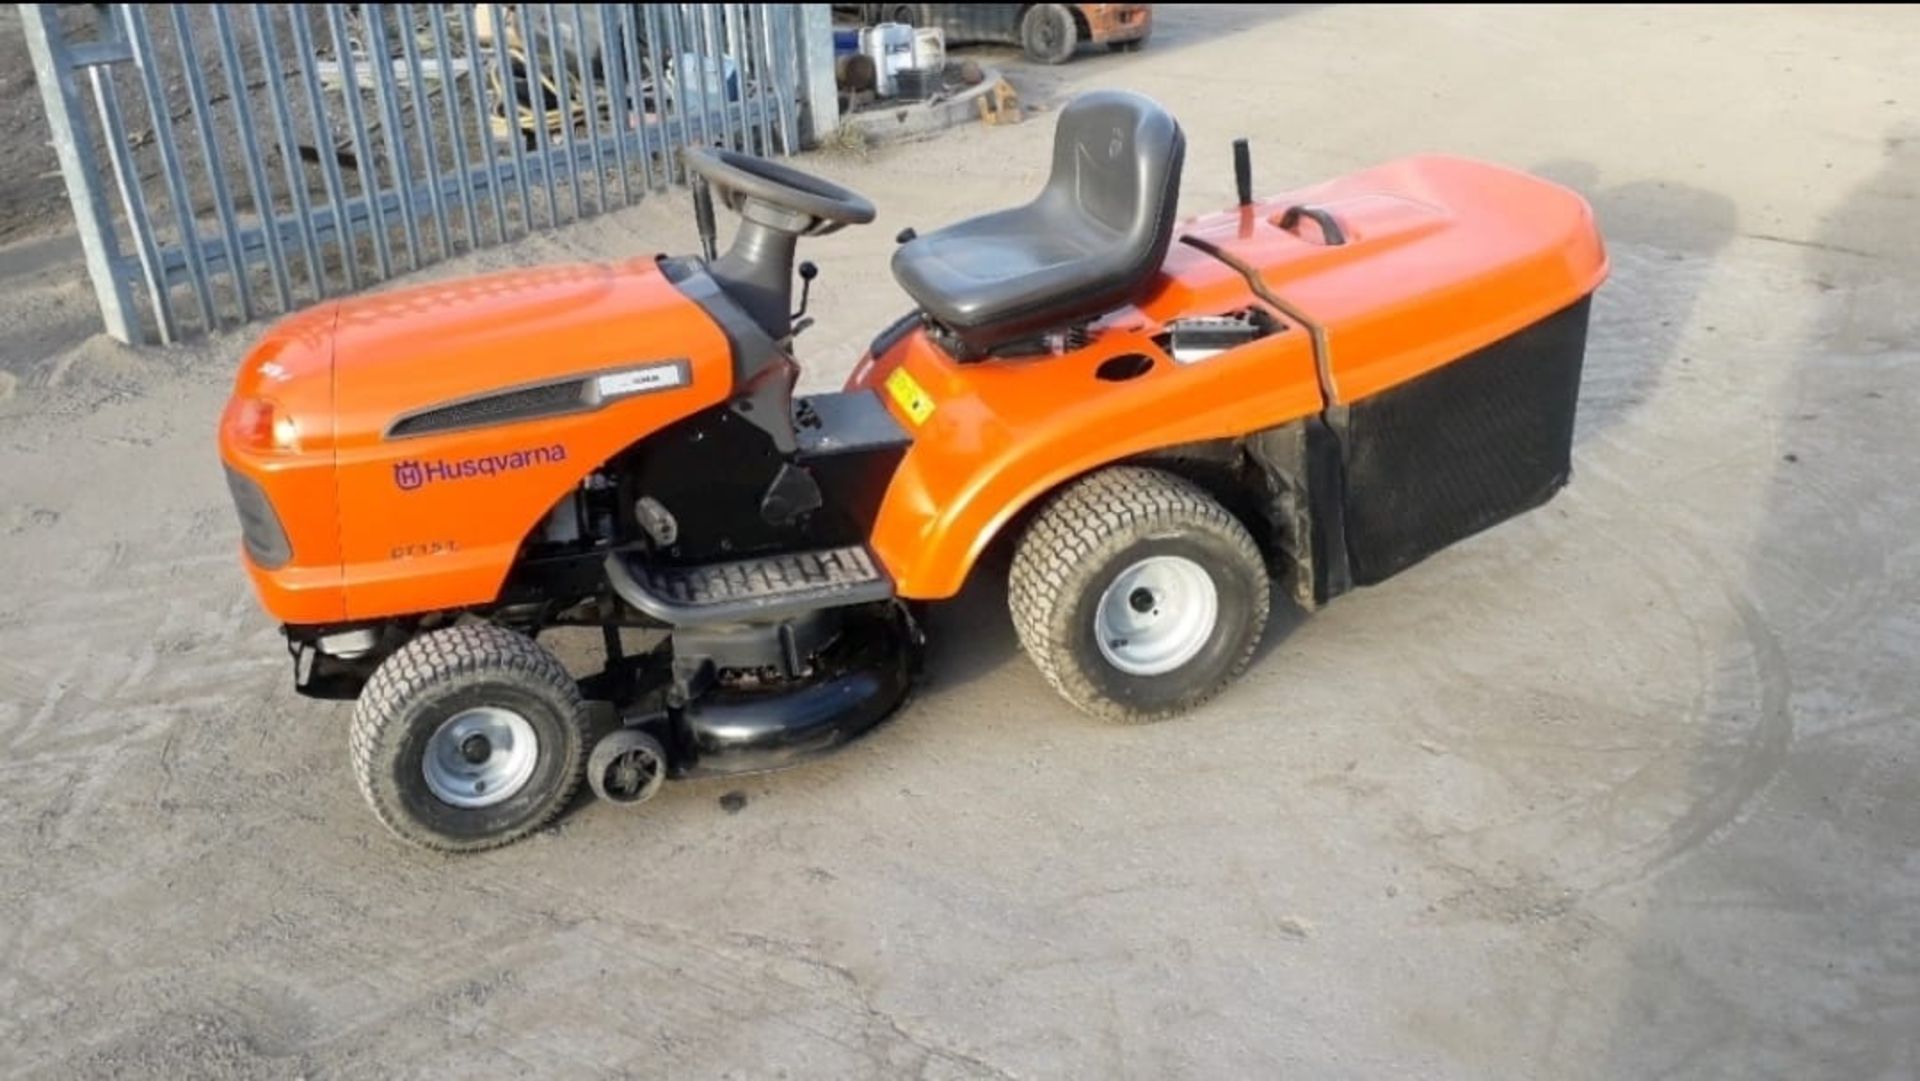 2006 HUSQVARNA CT151 PETROL WORKING ORDER COMES WITH GRASS BOX *NO VAT* - Image 2 of 8